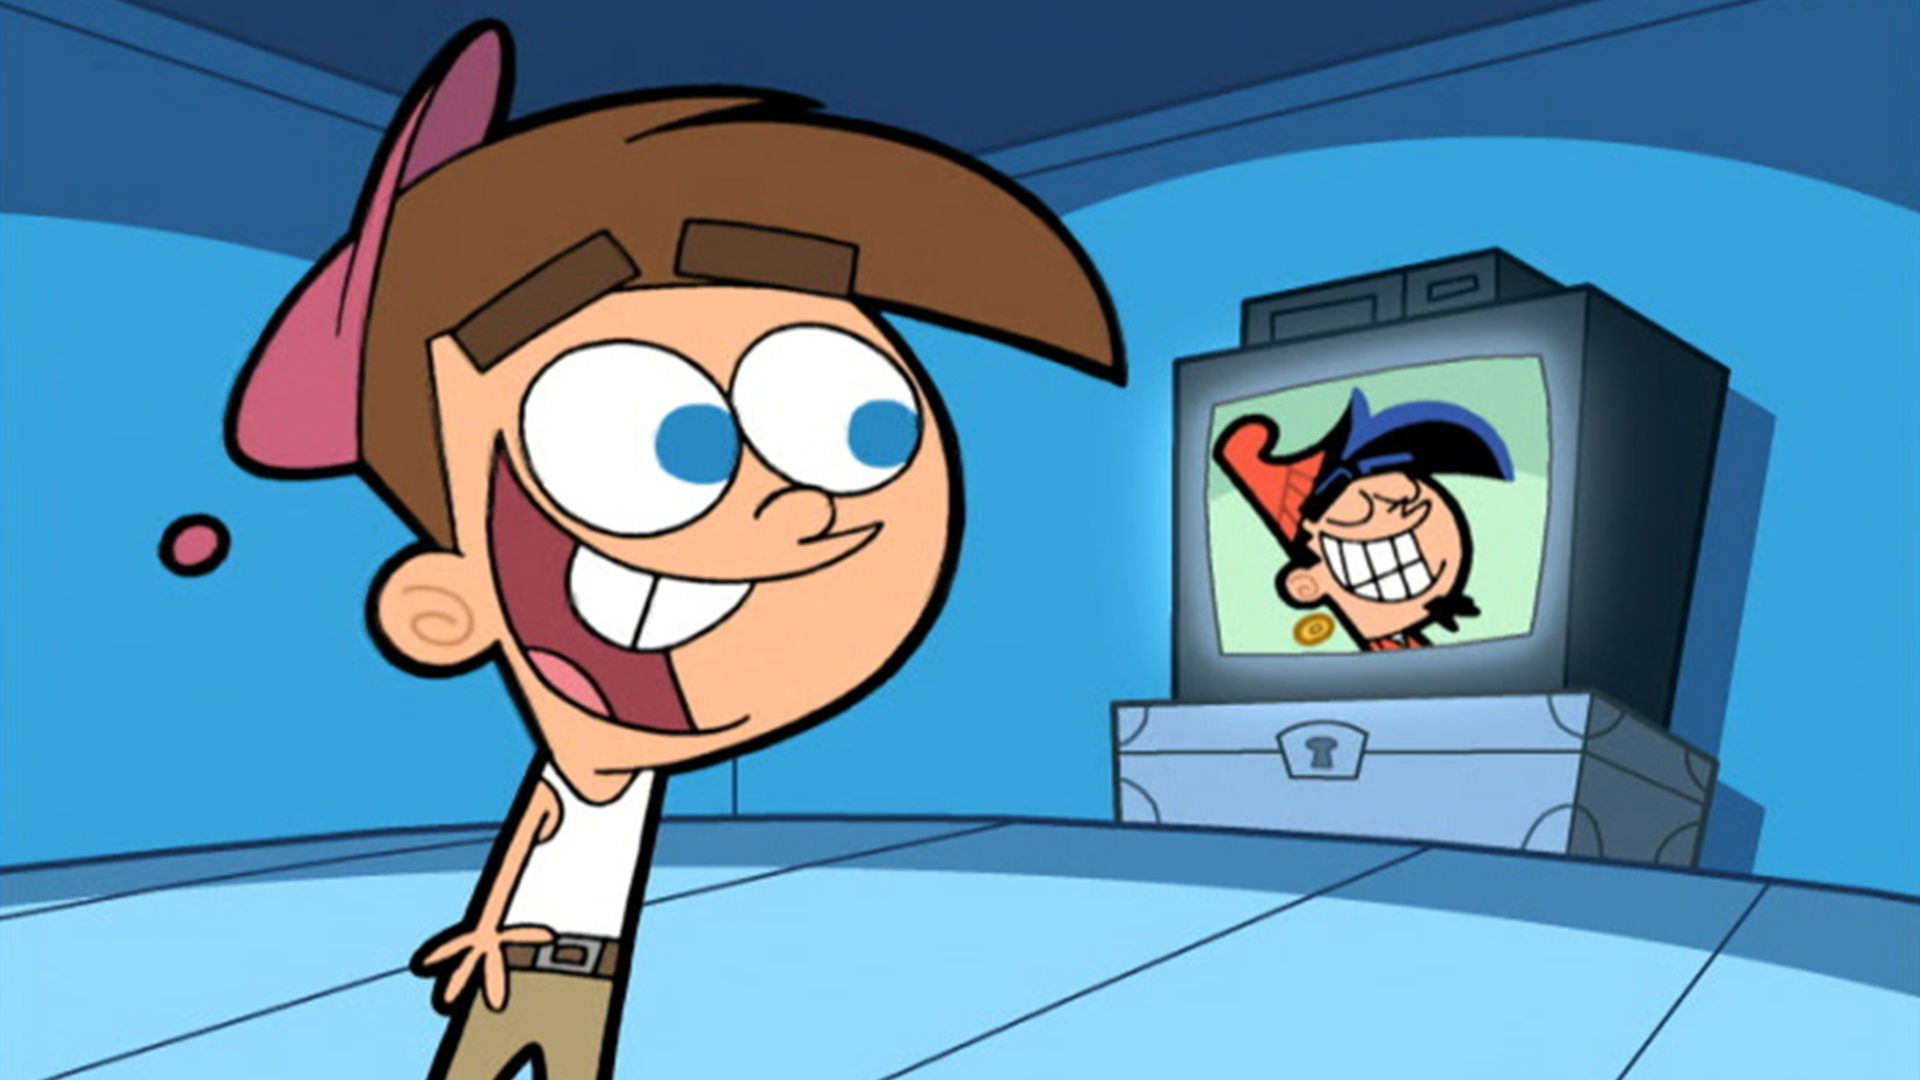 Chip fairly oddparents